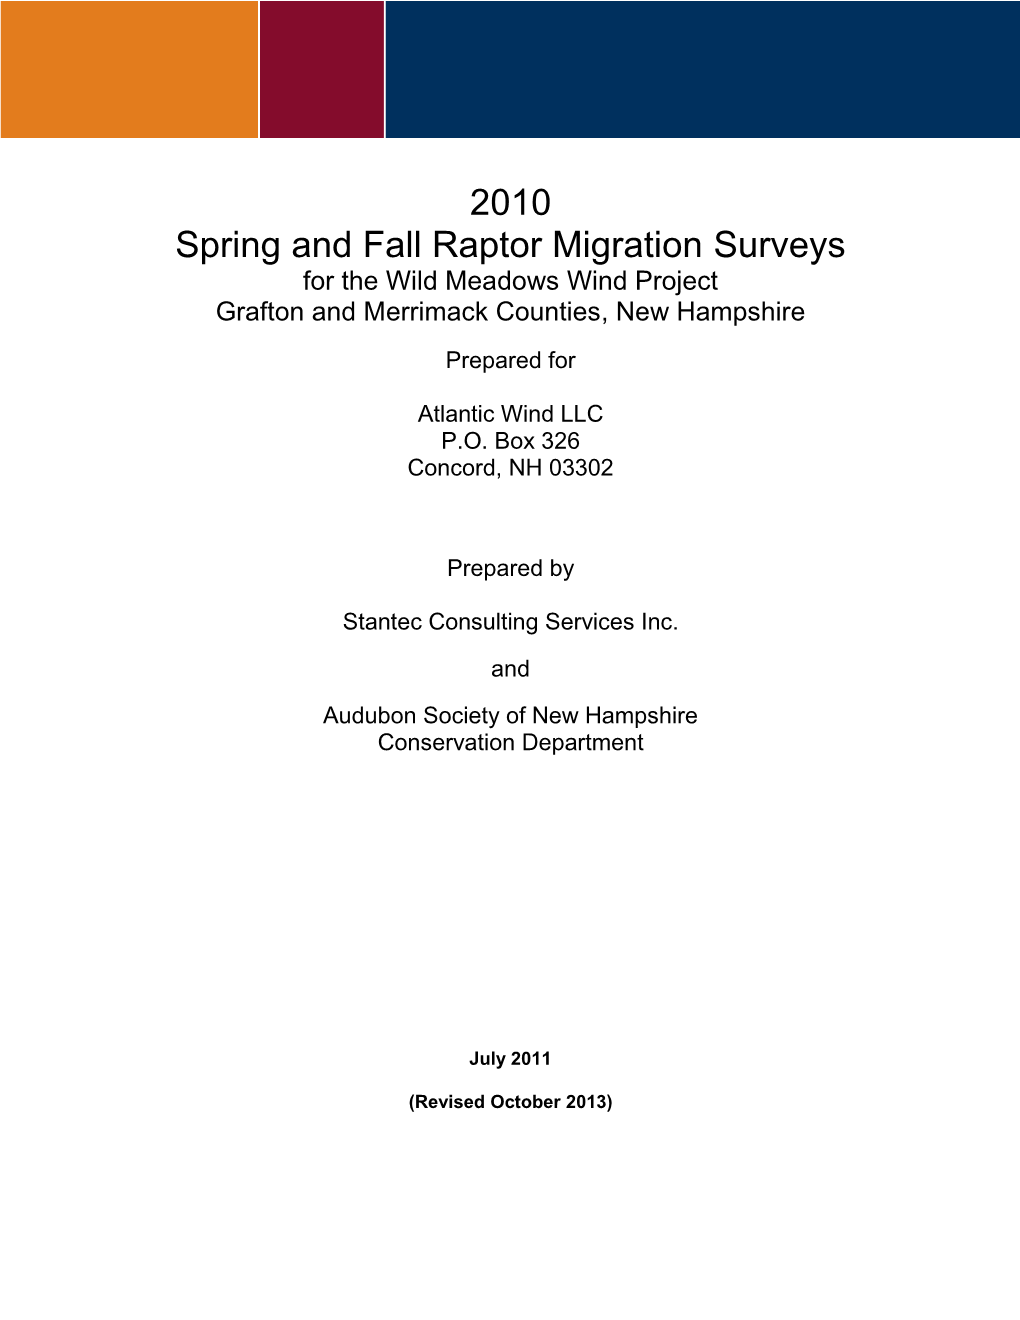 2010 Spring and Fall Raptor Migration Surveys for the Wild Meadows Wind Project Grafton and Merrimack Counties, New Hampshire